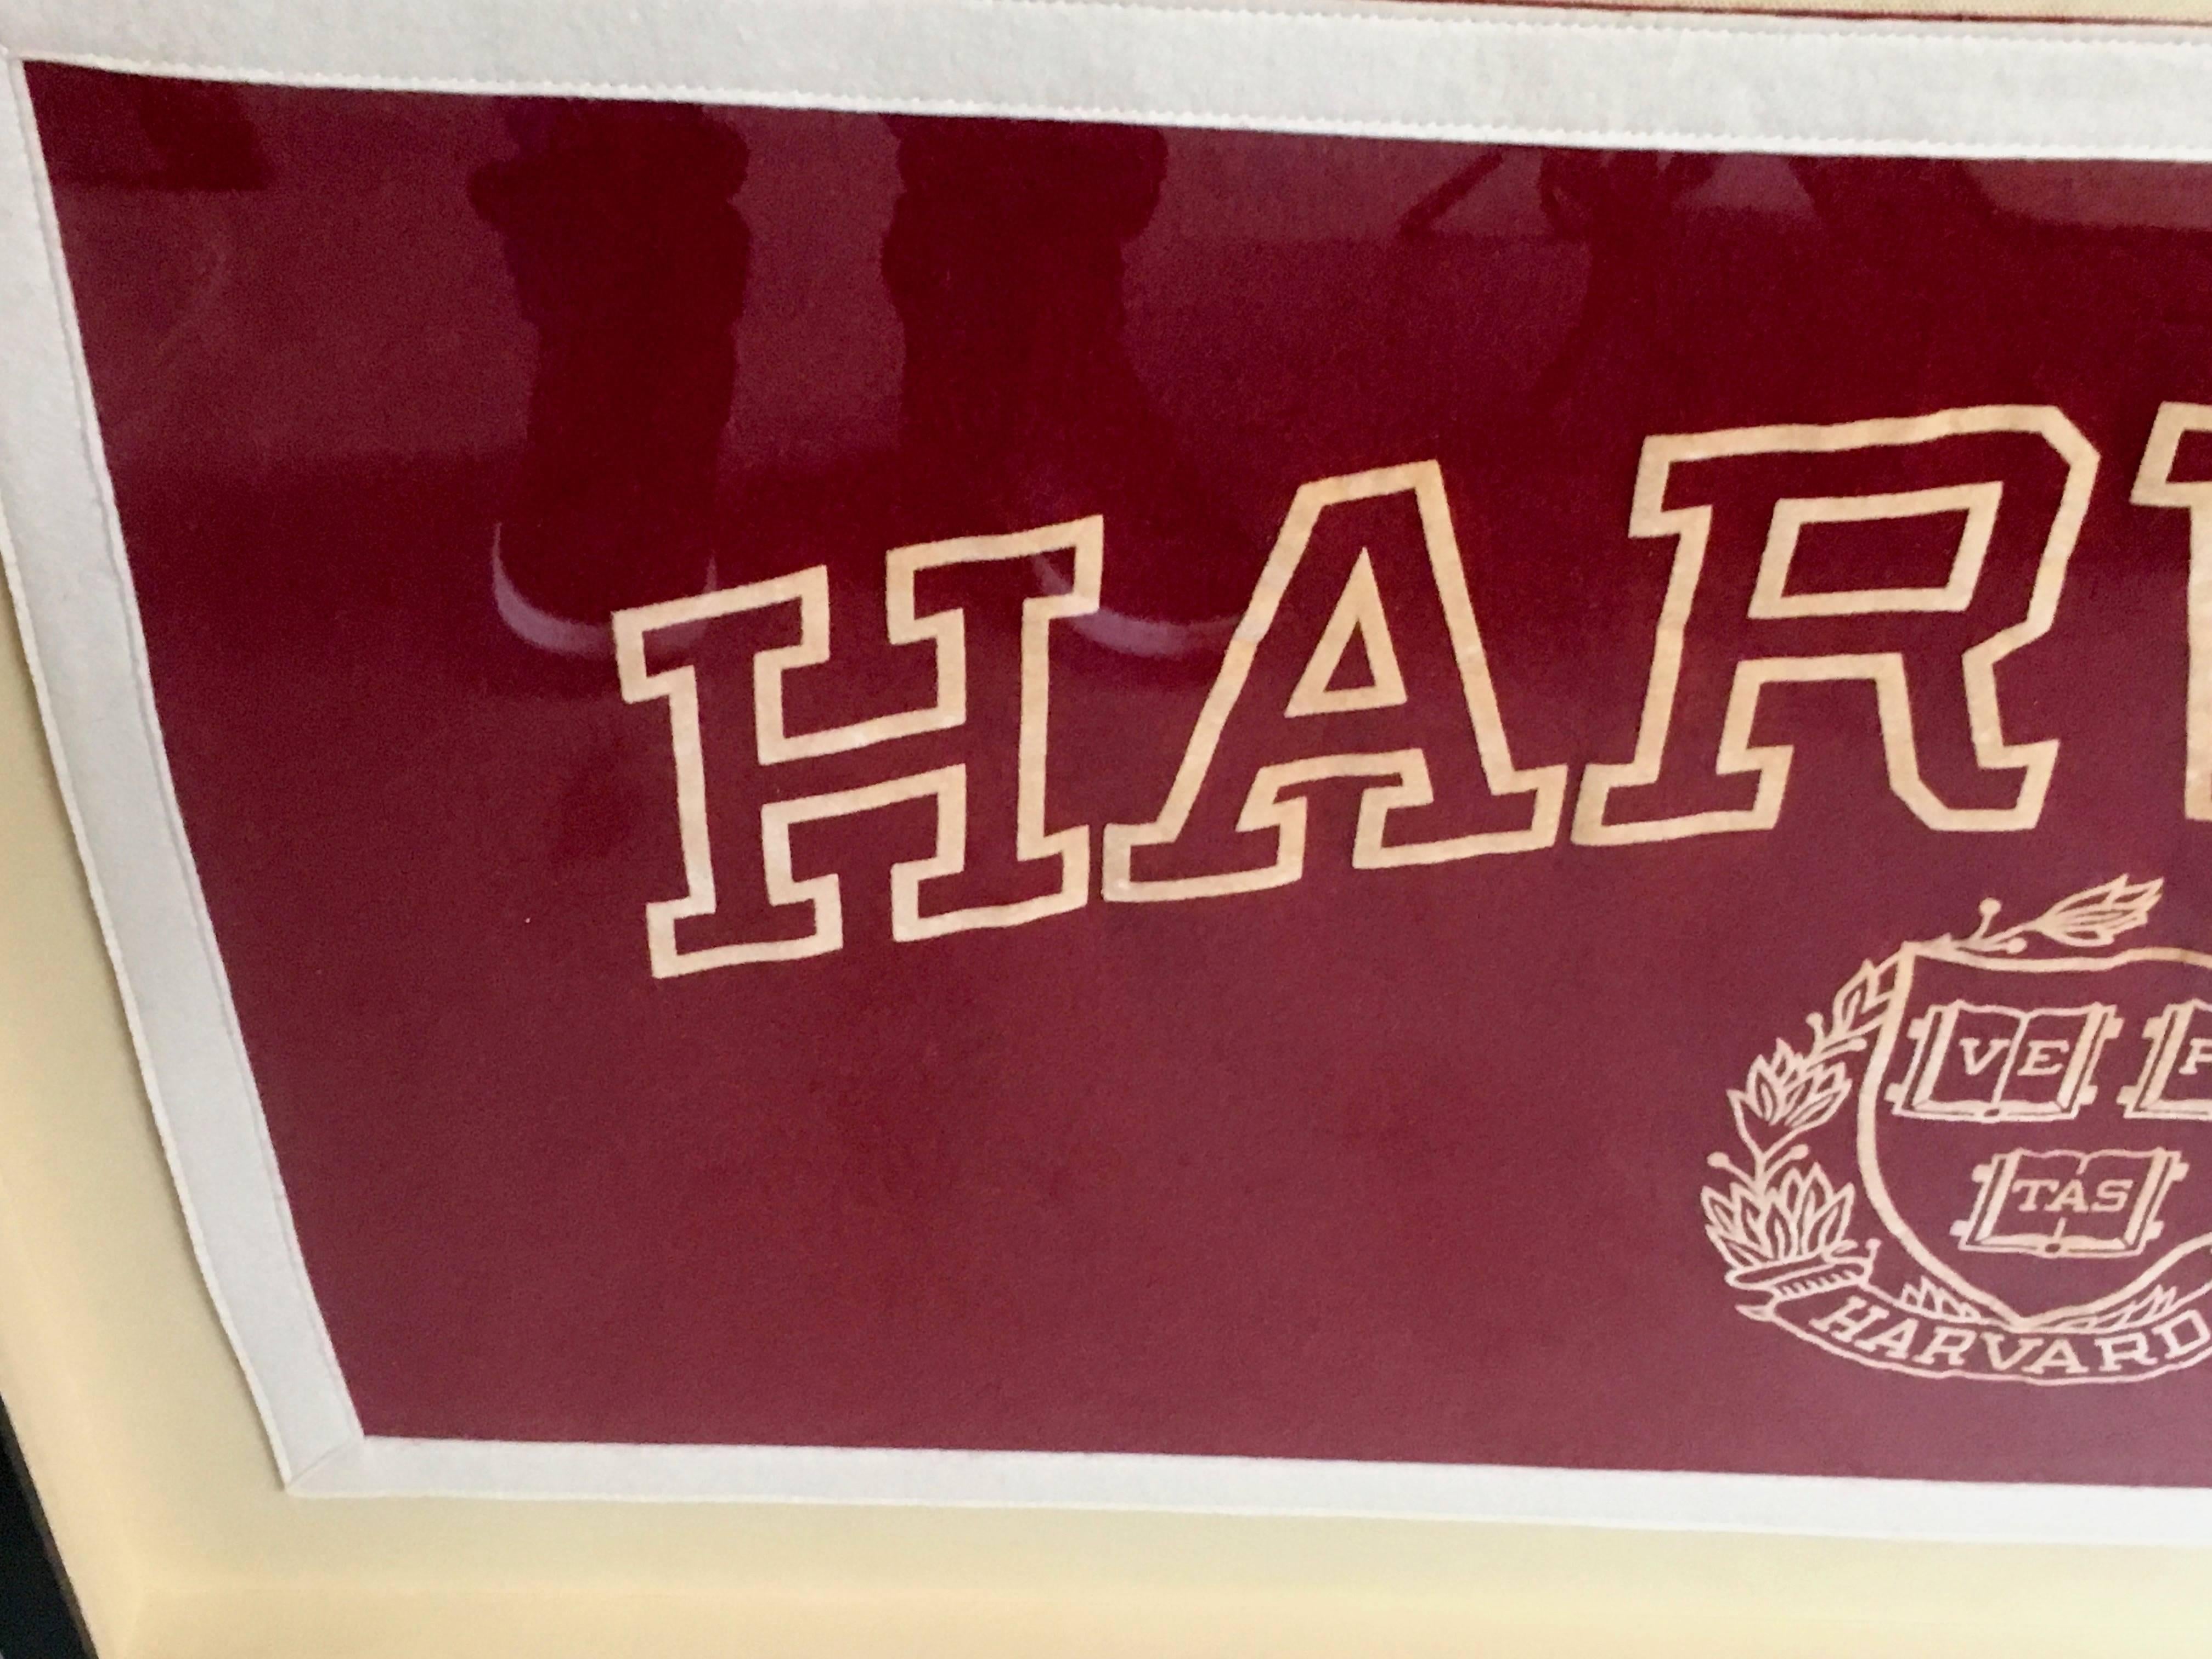 Unique Harvard University school banner from the 1930s. Great piece of Americana. Original red and white coloring with great patina. Hand stitched. Newly framed and mounted on linen backing.

Dimensions of banner are 16.5